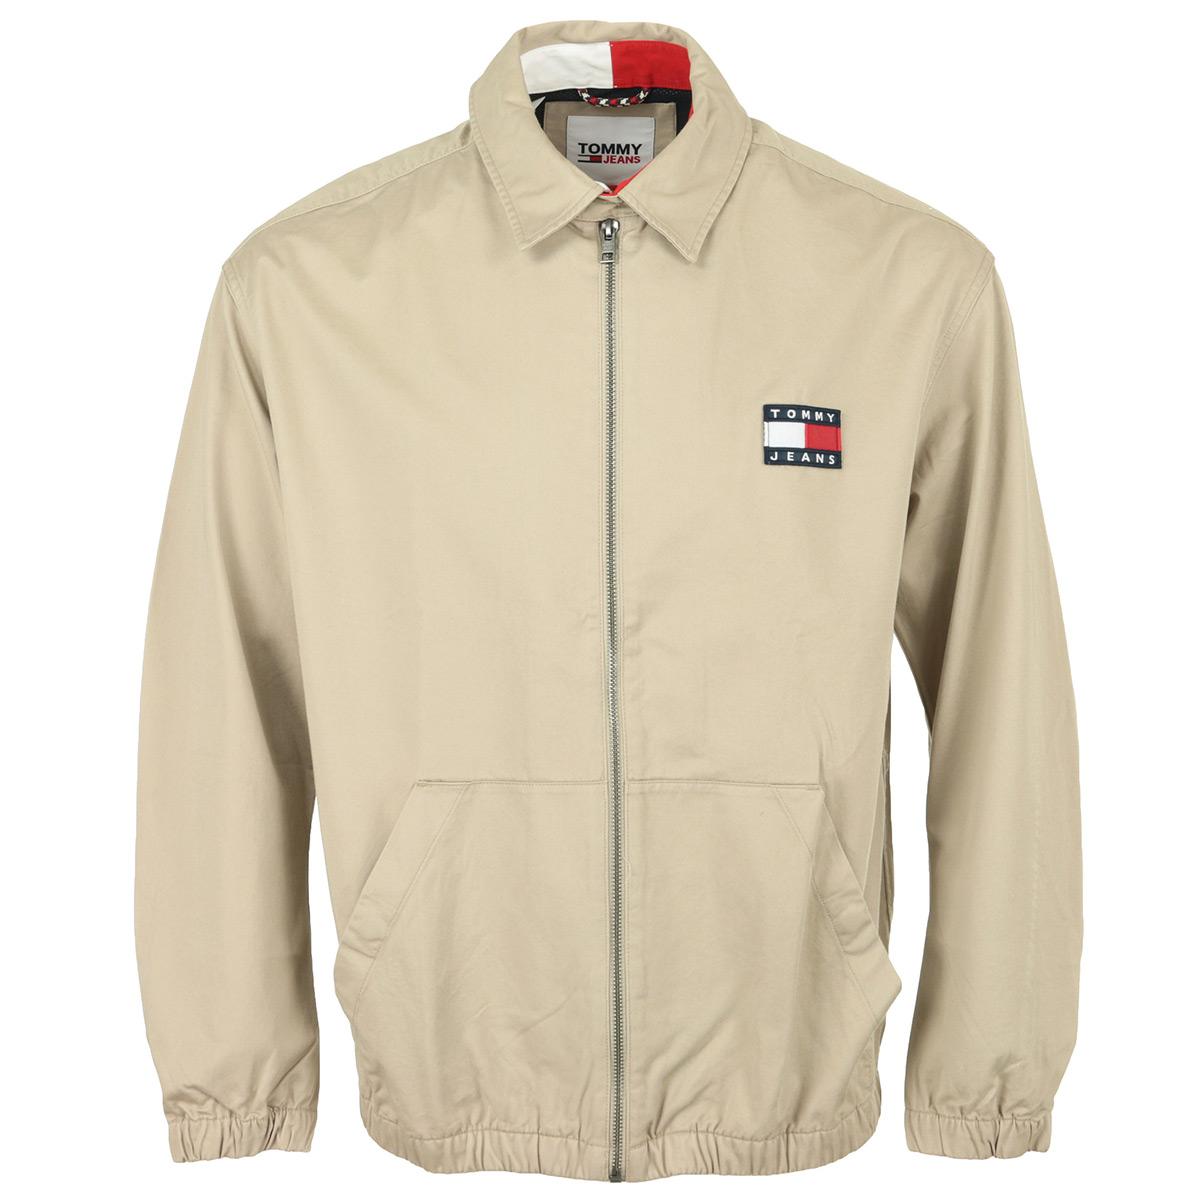 Tommy Hilfiger "Casual Cotton Jacket"